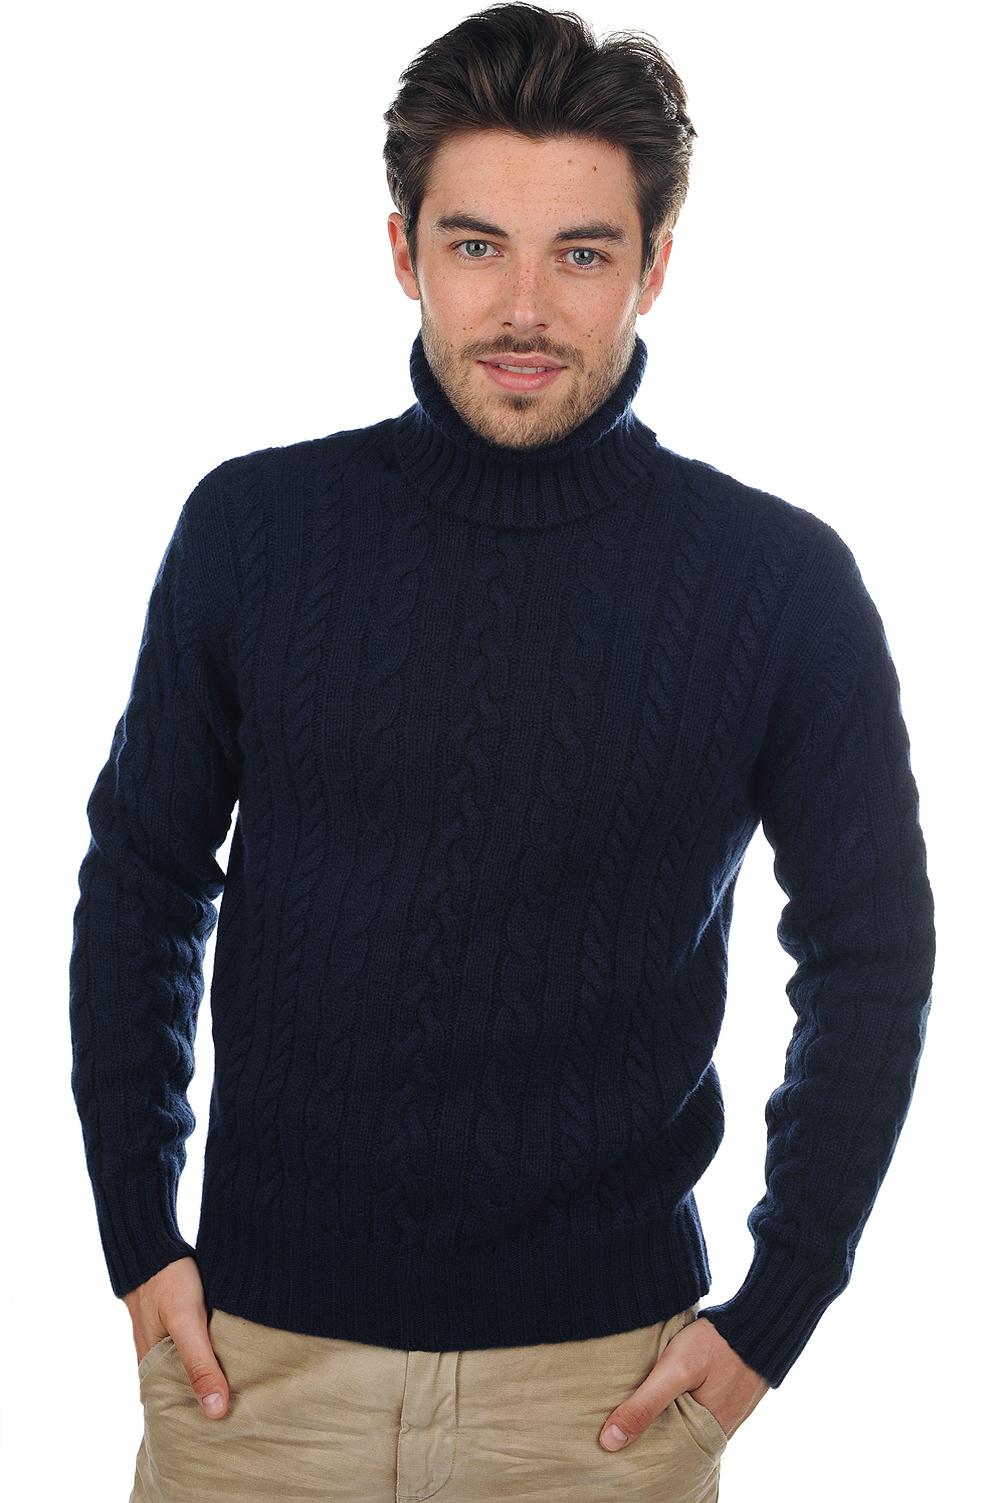 Cachemire pull homme col roule lucas marine fonce 2xl